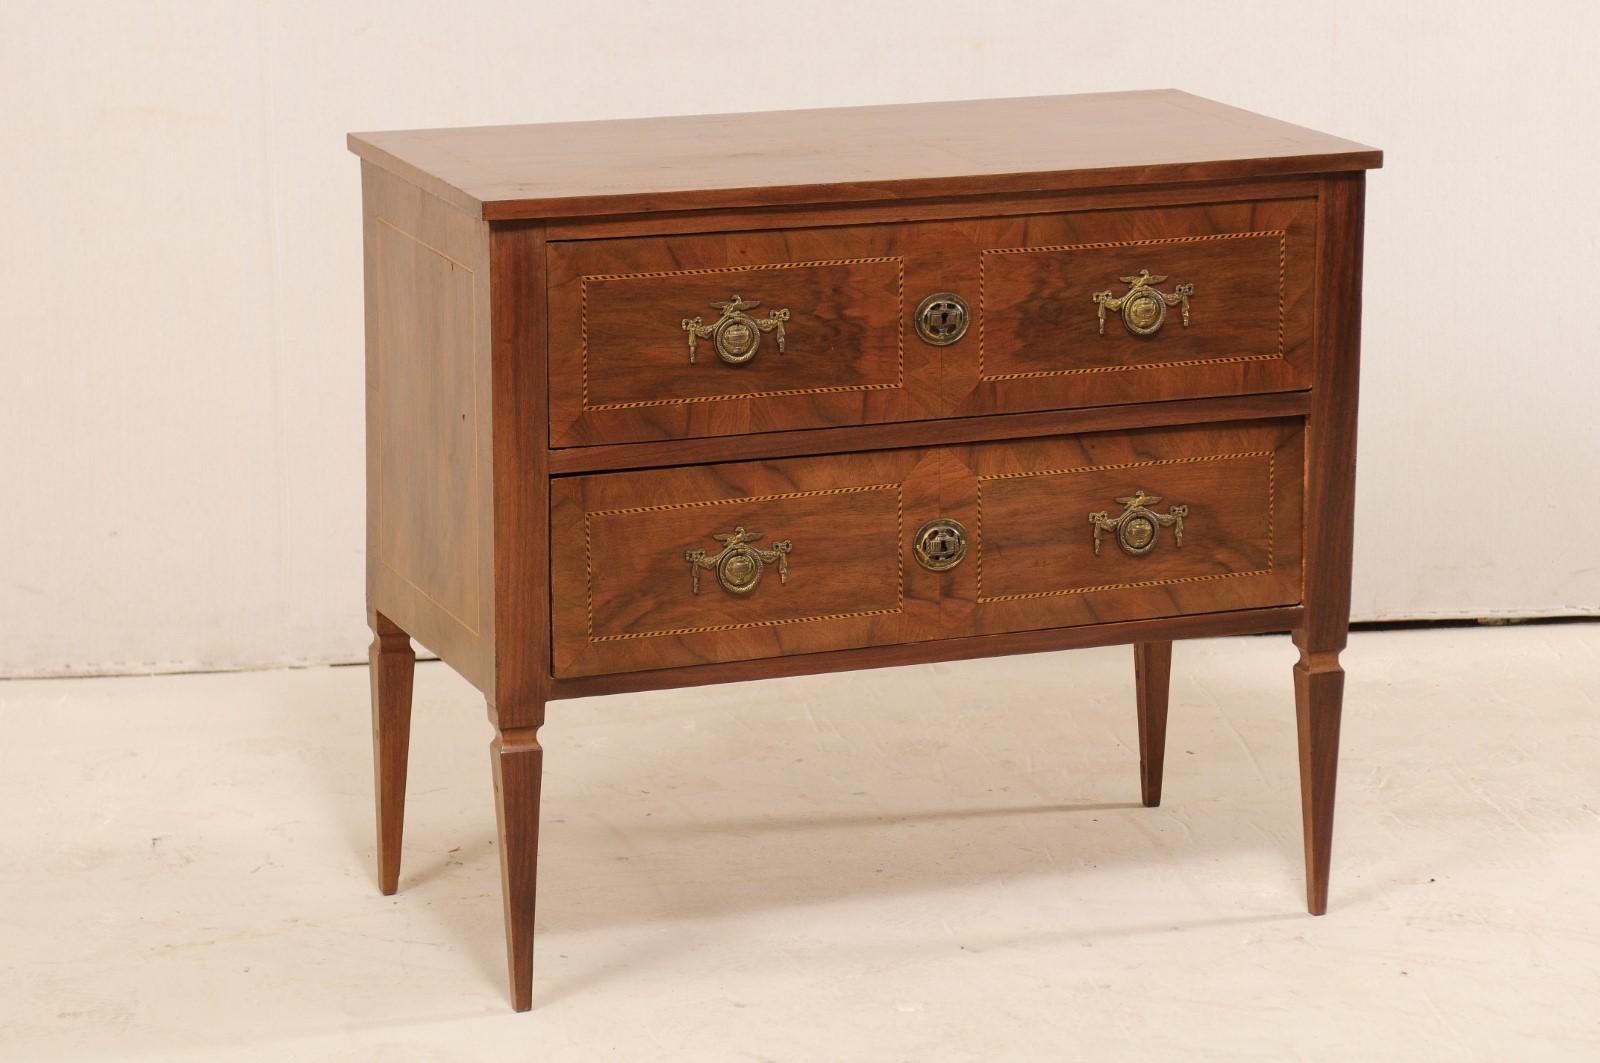 An Italian two-drawer chest from the early 20th century. This antique chest from Italy features delicate inlay banding about it's top, drawer fronts and each side. The cabinet houses two drawers, each fitted with a pair of decorative ring pulls